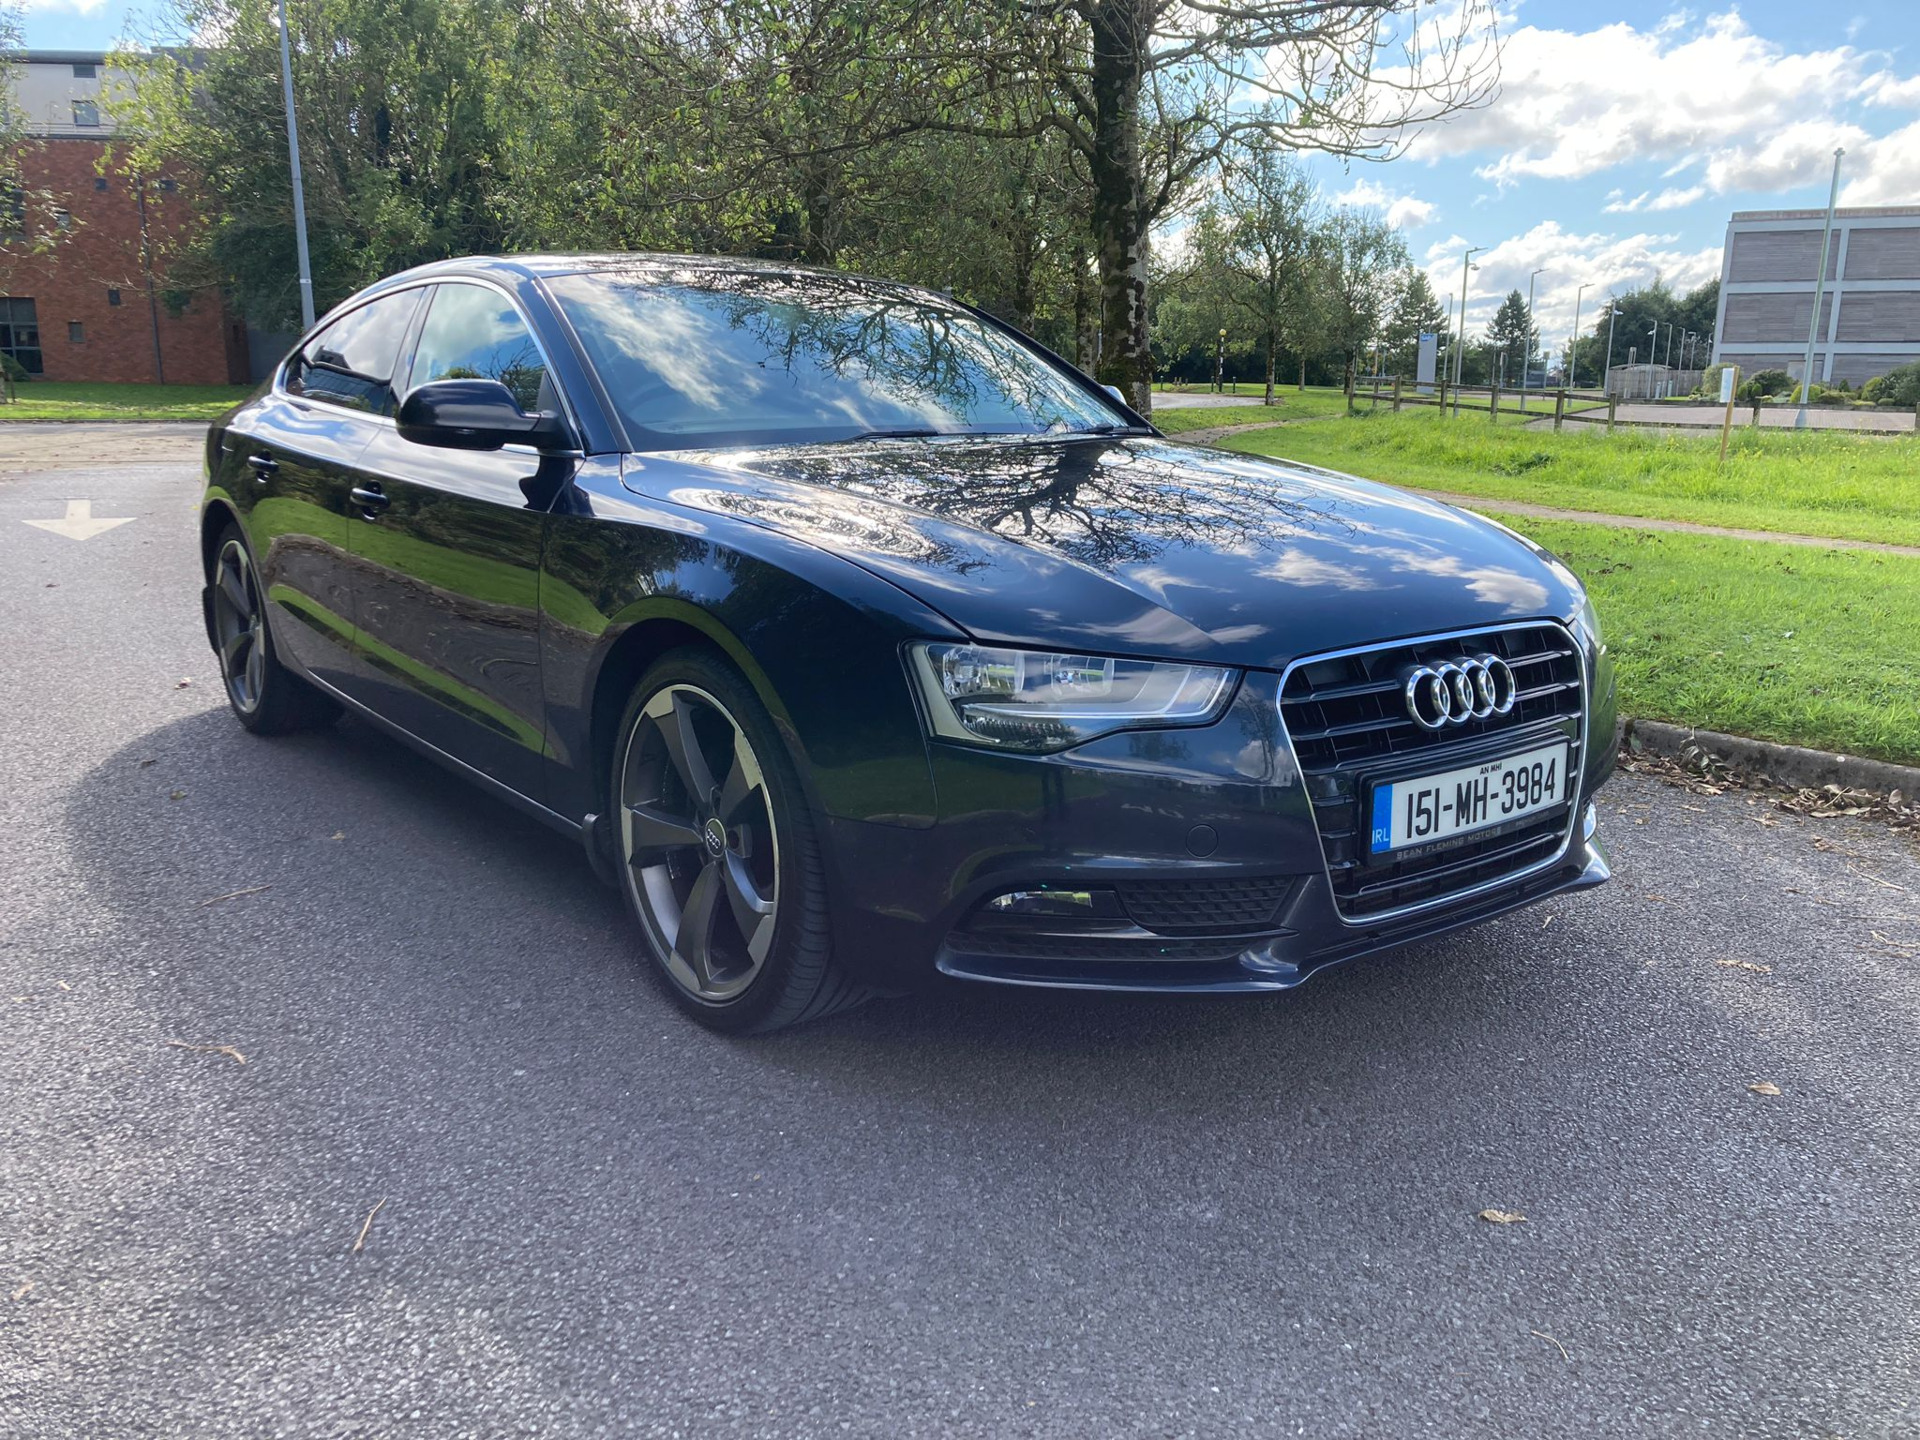 Used Audi A5 2015 in Galway